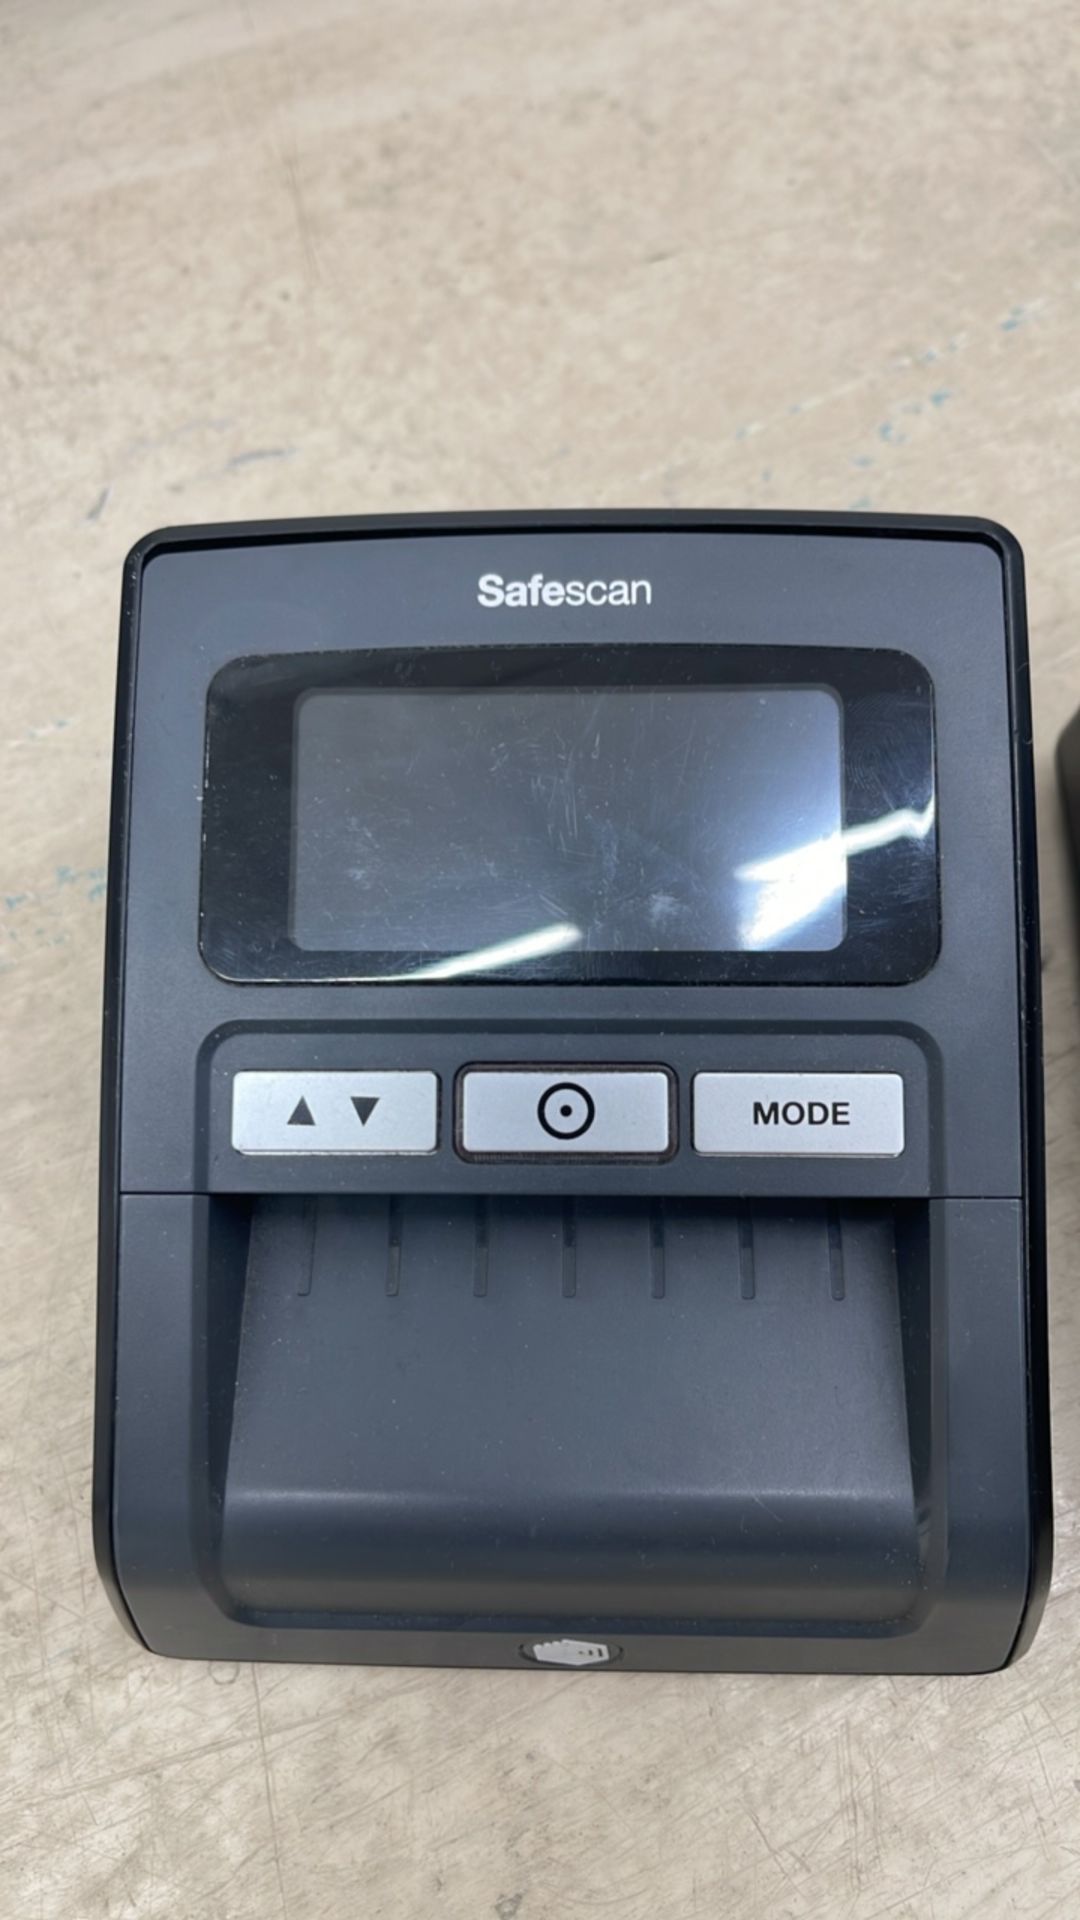 Pair Of Safescan Counterfeit Detector Machines - Image 2 of 3